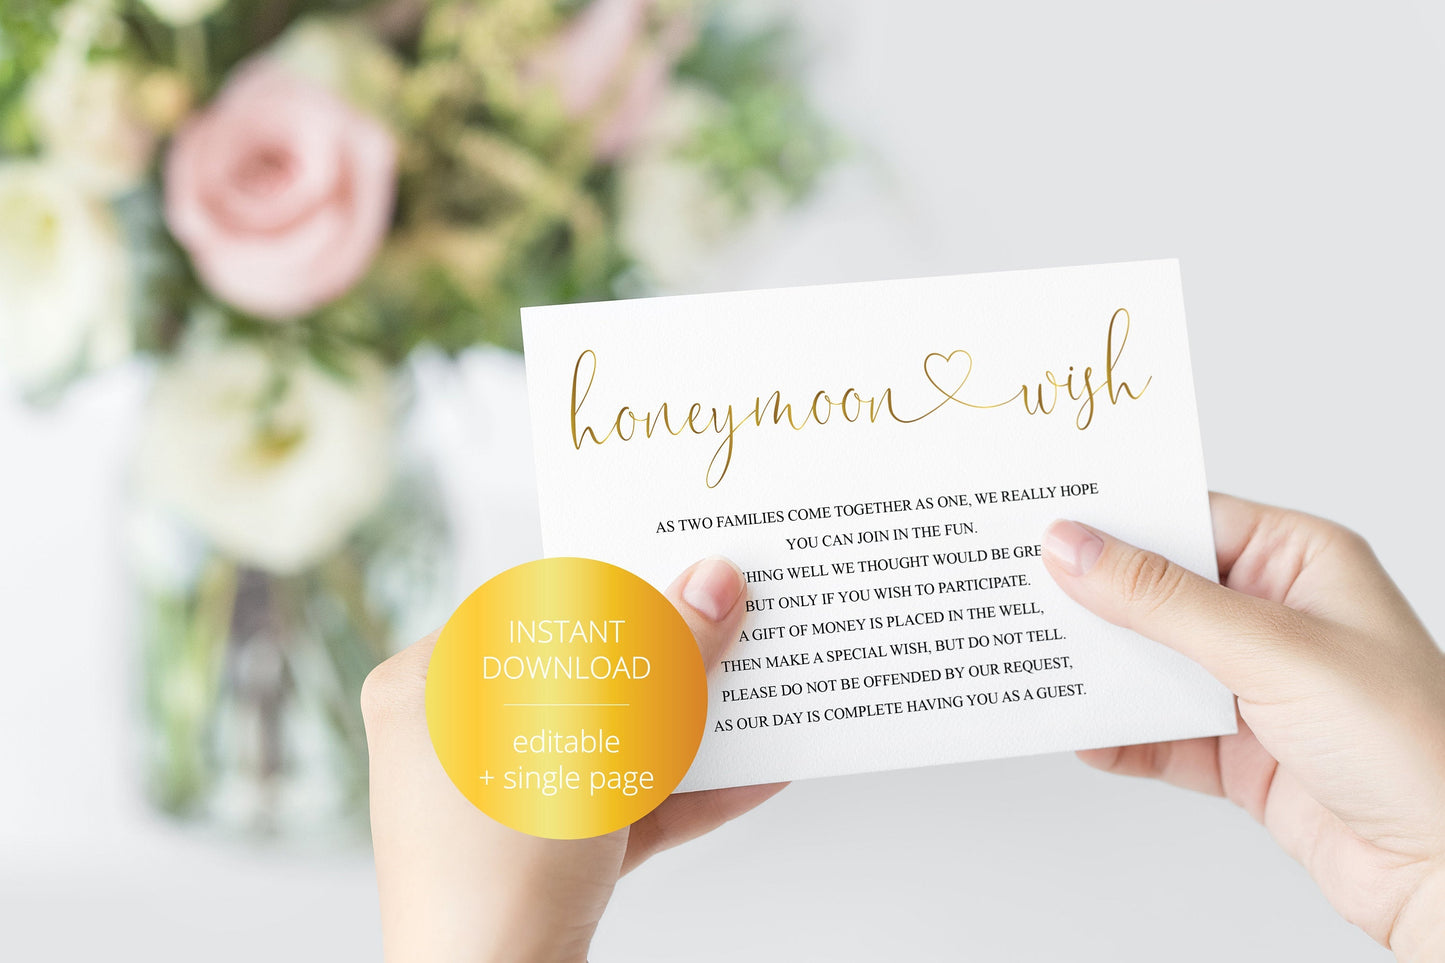 Honeymoon Wishing Well Card Template, Honeymoon Wish, Honeymoon Fund, Honeymoon Request, Wish Card, Wedding Insert, Gold  - Heather TAGS | TY | INSERTS SAVVY PAPER CO